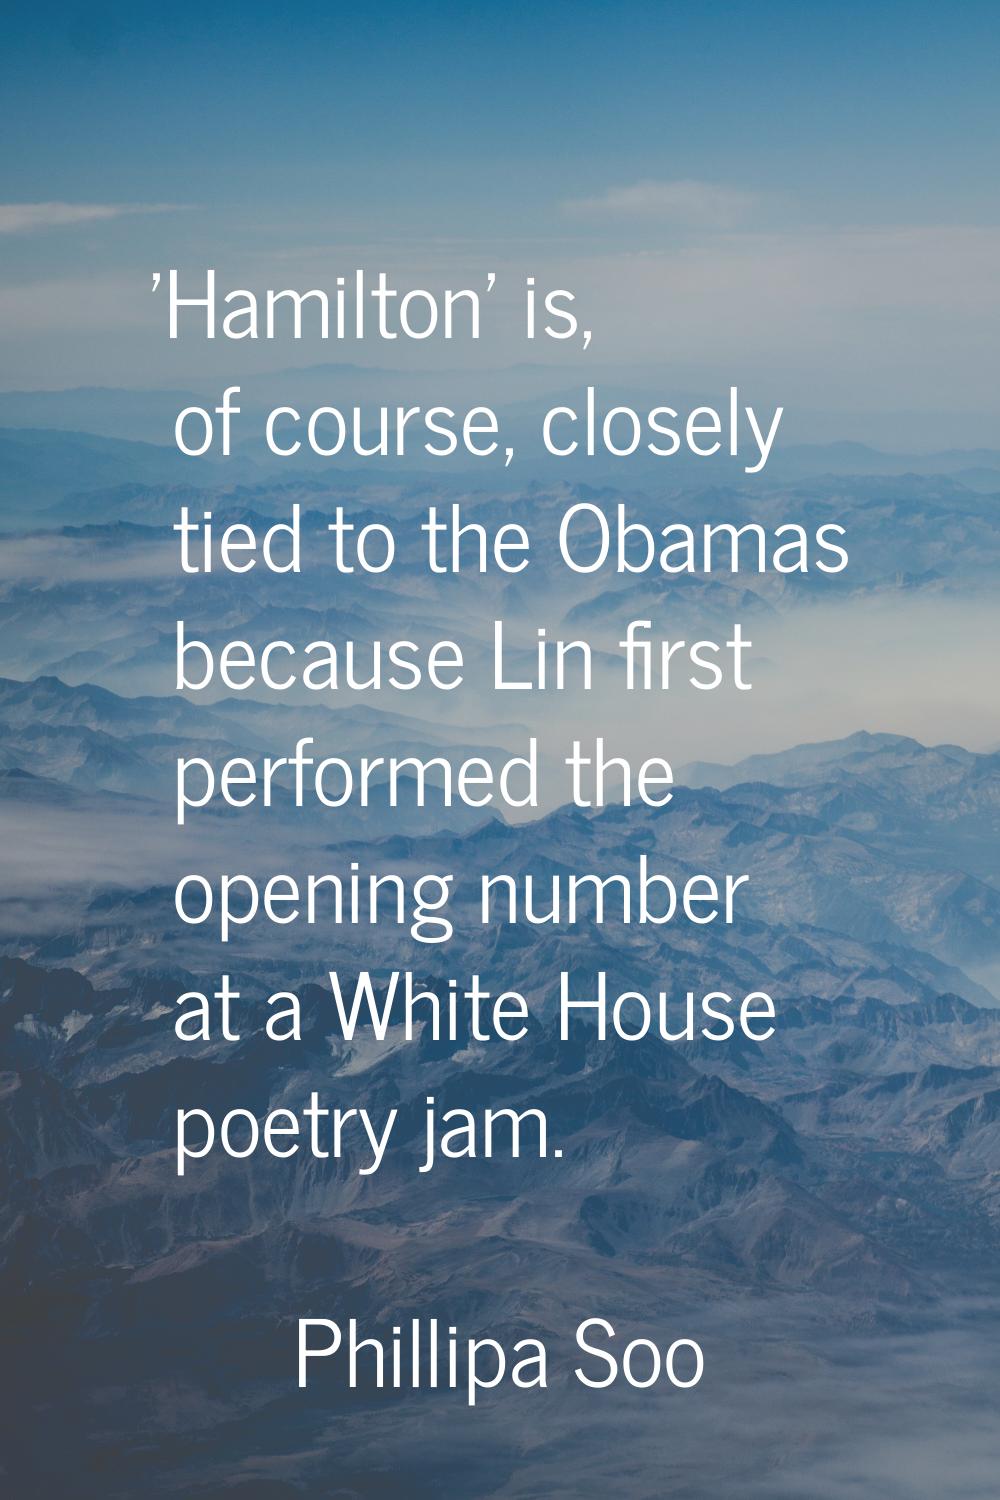 'Hamilton' is, of course, closely tied to the Obamas because Lin first performed the opening number